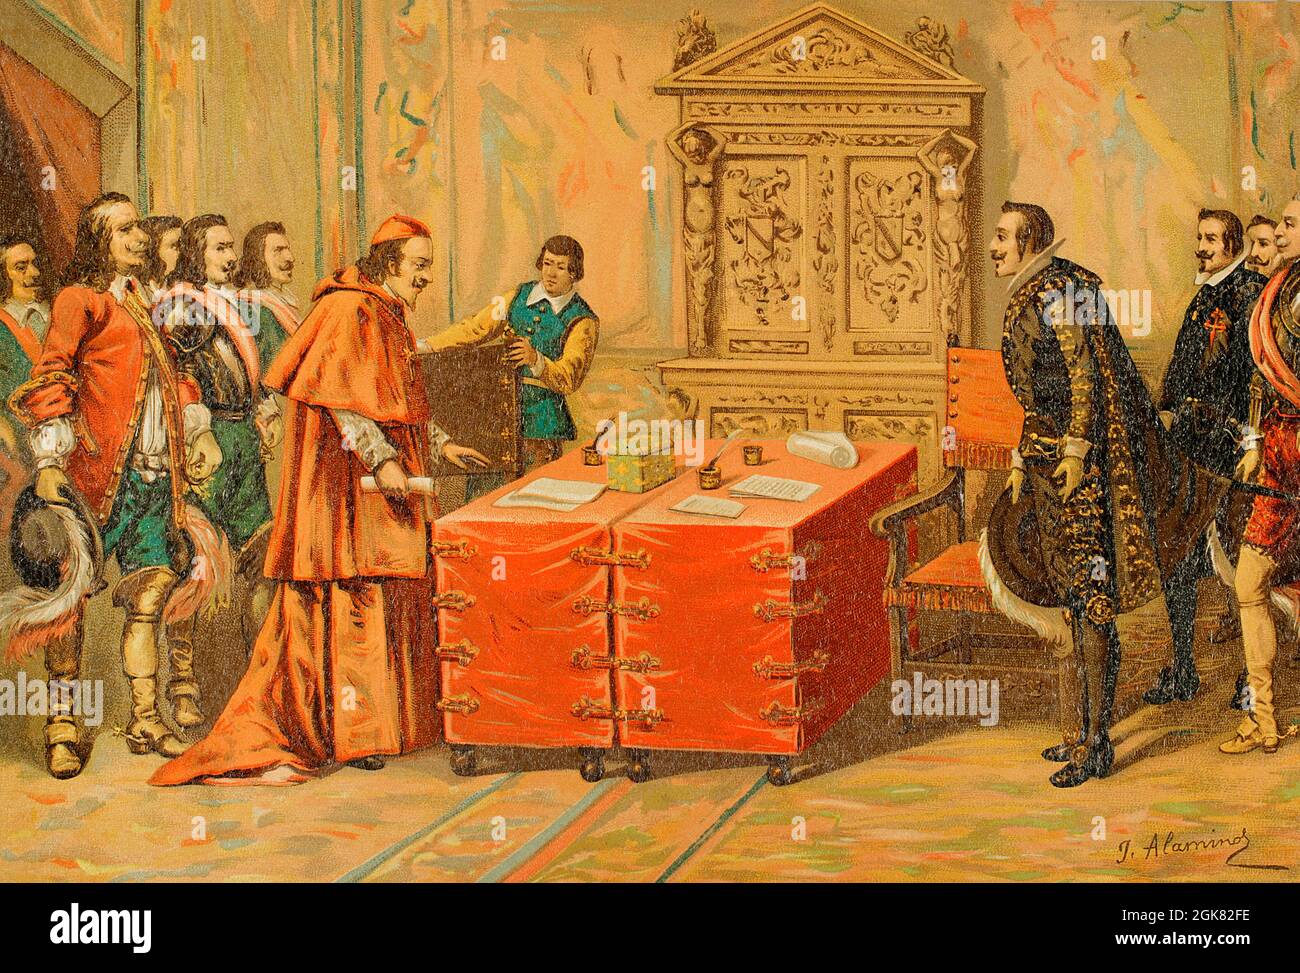 Modern Age. Conferences on Pheasant Island that took place between August and November 1659. The Spanish nobleman Luis Méndez de Haro and Jules Raymond Mazarin, known as Cardinal Mazarin, represented Spain and France respectively during a total of 23 meetings, negotiating the conditions that led to the treaty of peace (Treaty of the Pyrenees), signed on November 7, 1659. This treaty established the border between the two countries and end the war between both nations. Illustration by J. Alaminos. Chromolithography. Historia General de España (General History of Spain), by Miguel Morayta. Volum Stock Photo